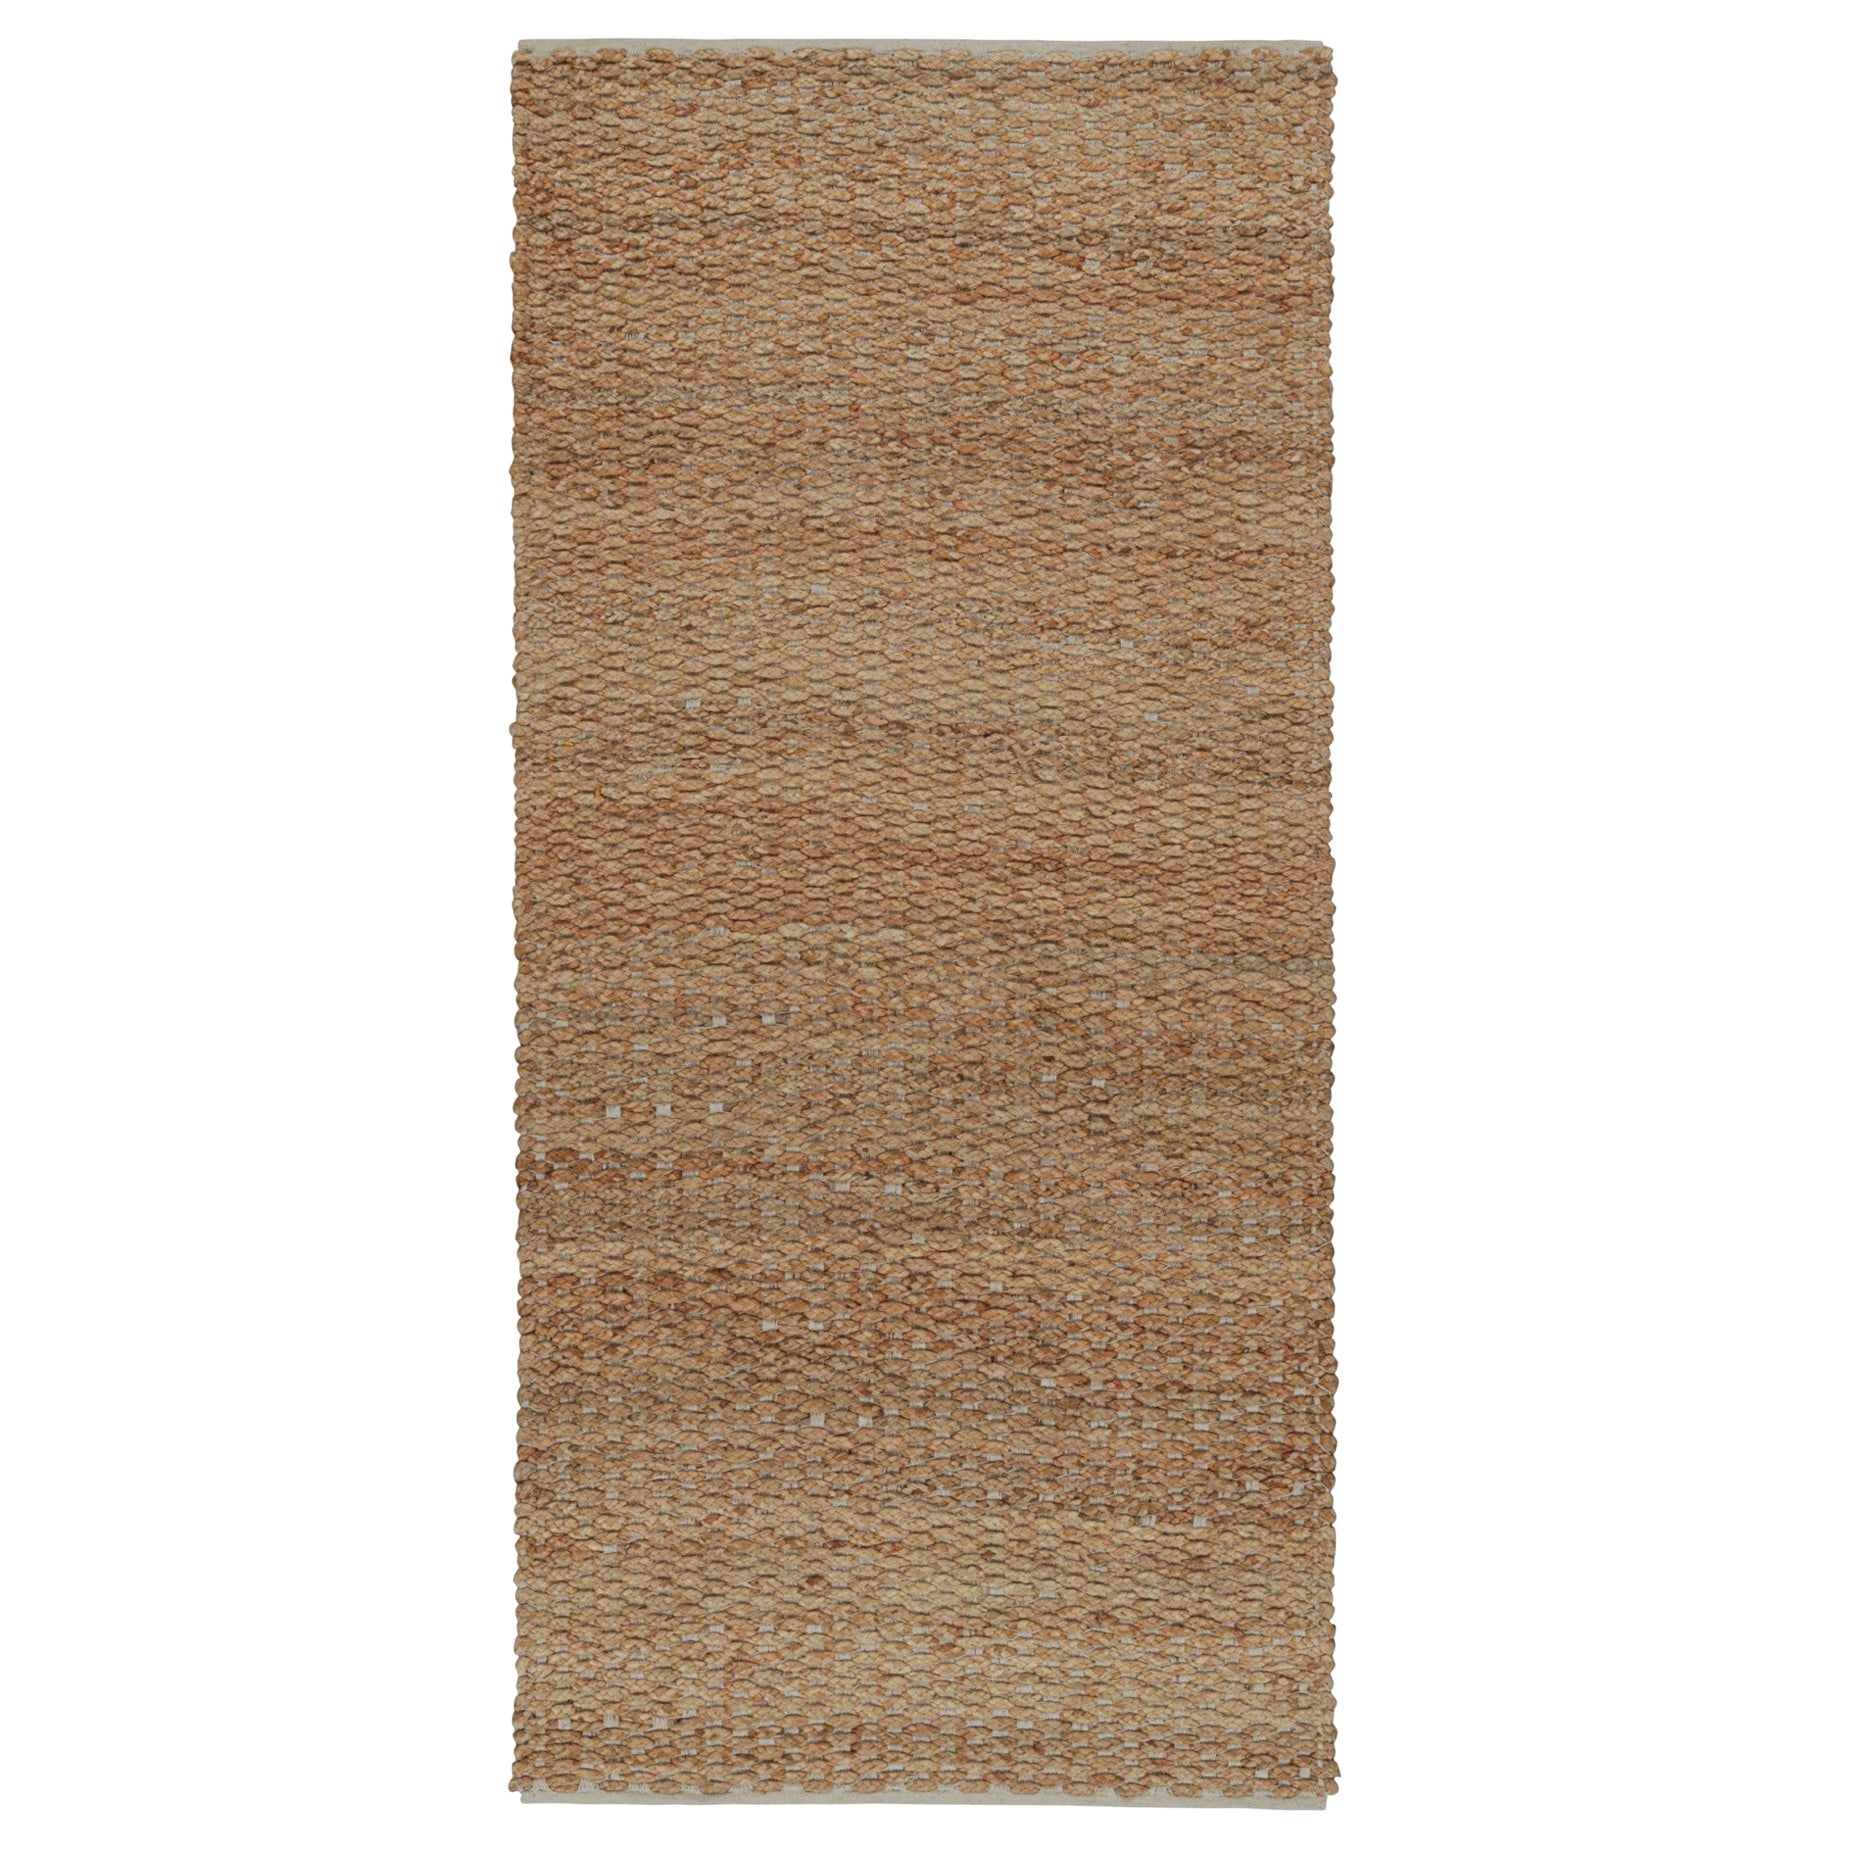 The Moderns Flatweave Runner in Beige/Brown, with Textural Stripes, from Rug & Kilim (en anglais seulement)